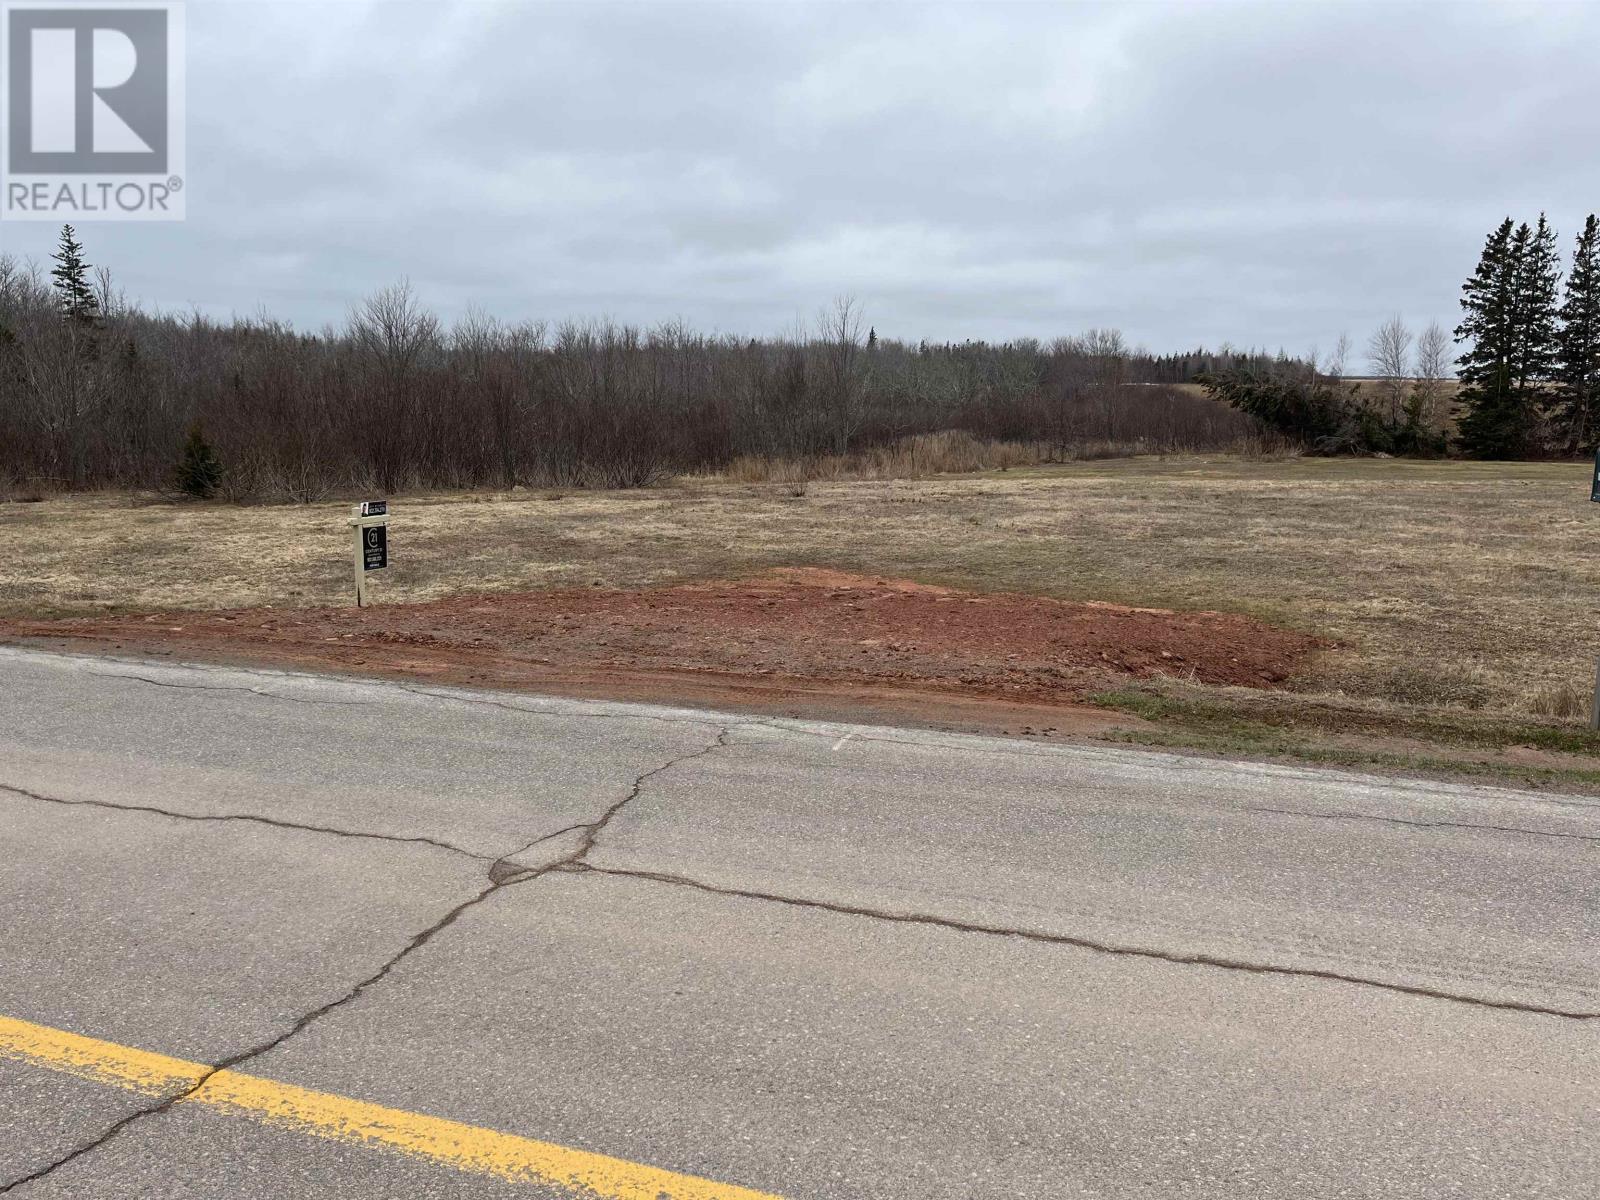 Lot Strathcona RoadLot Strathcona Road, Strathcona, Prince Edward Island C0A2A0, ,Vacant Land,For Sale,Lot Strathcona Road,202306538